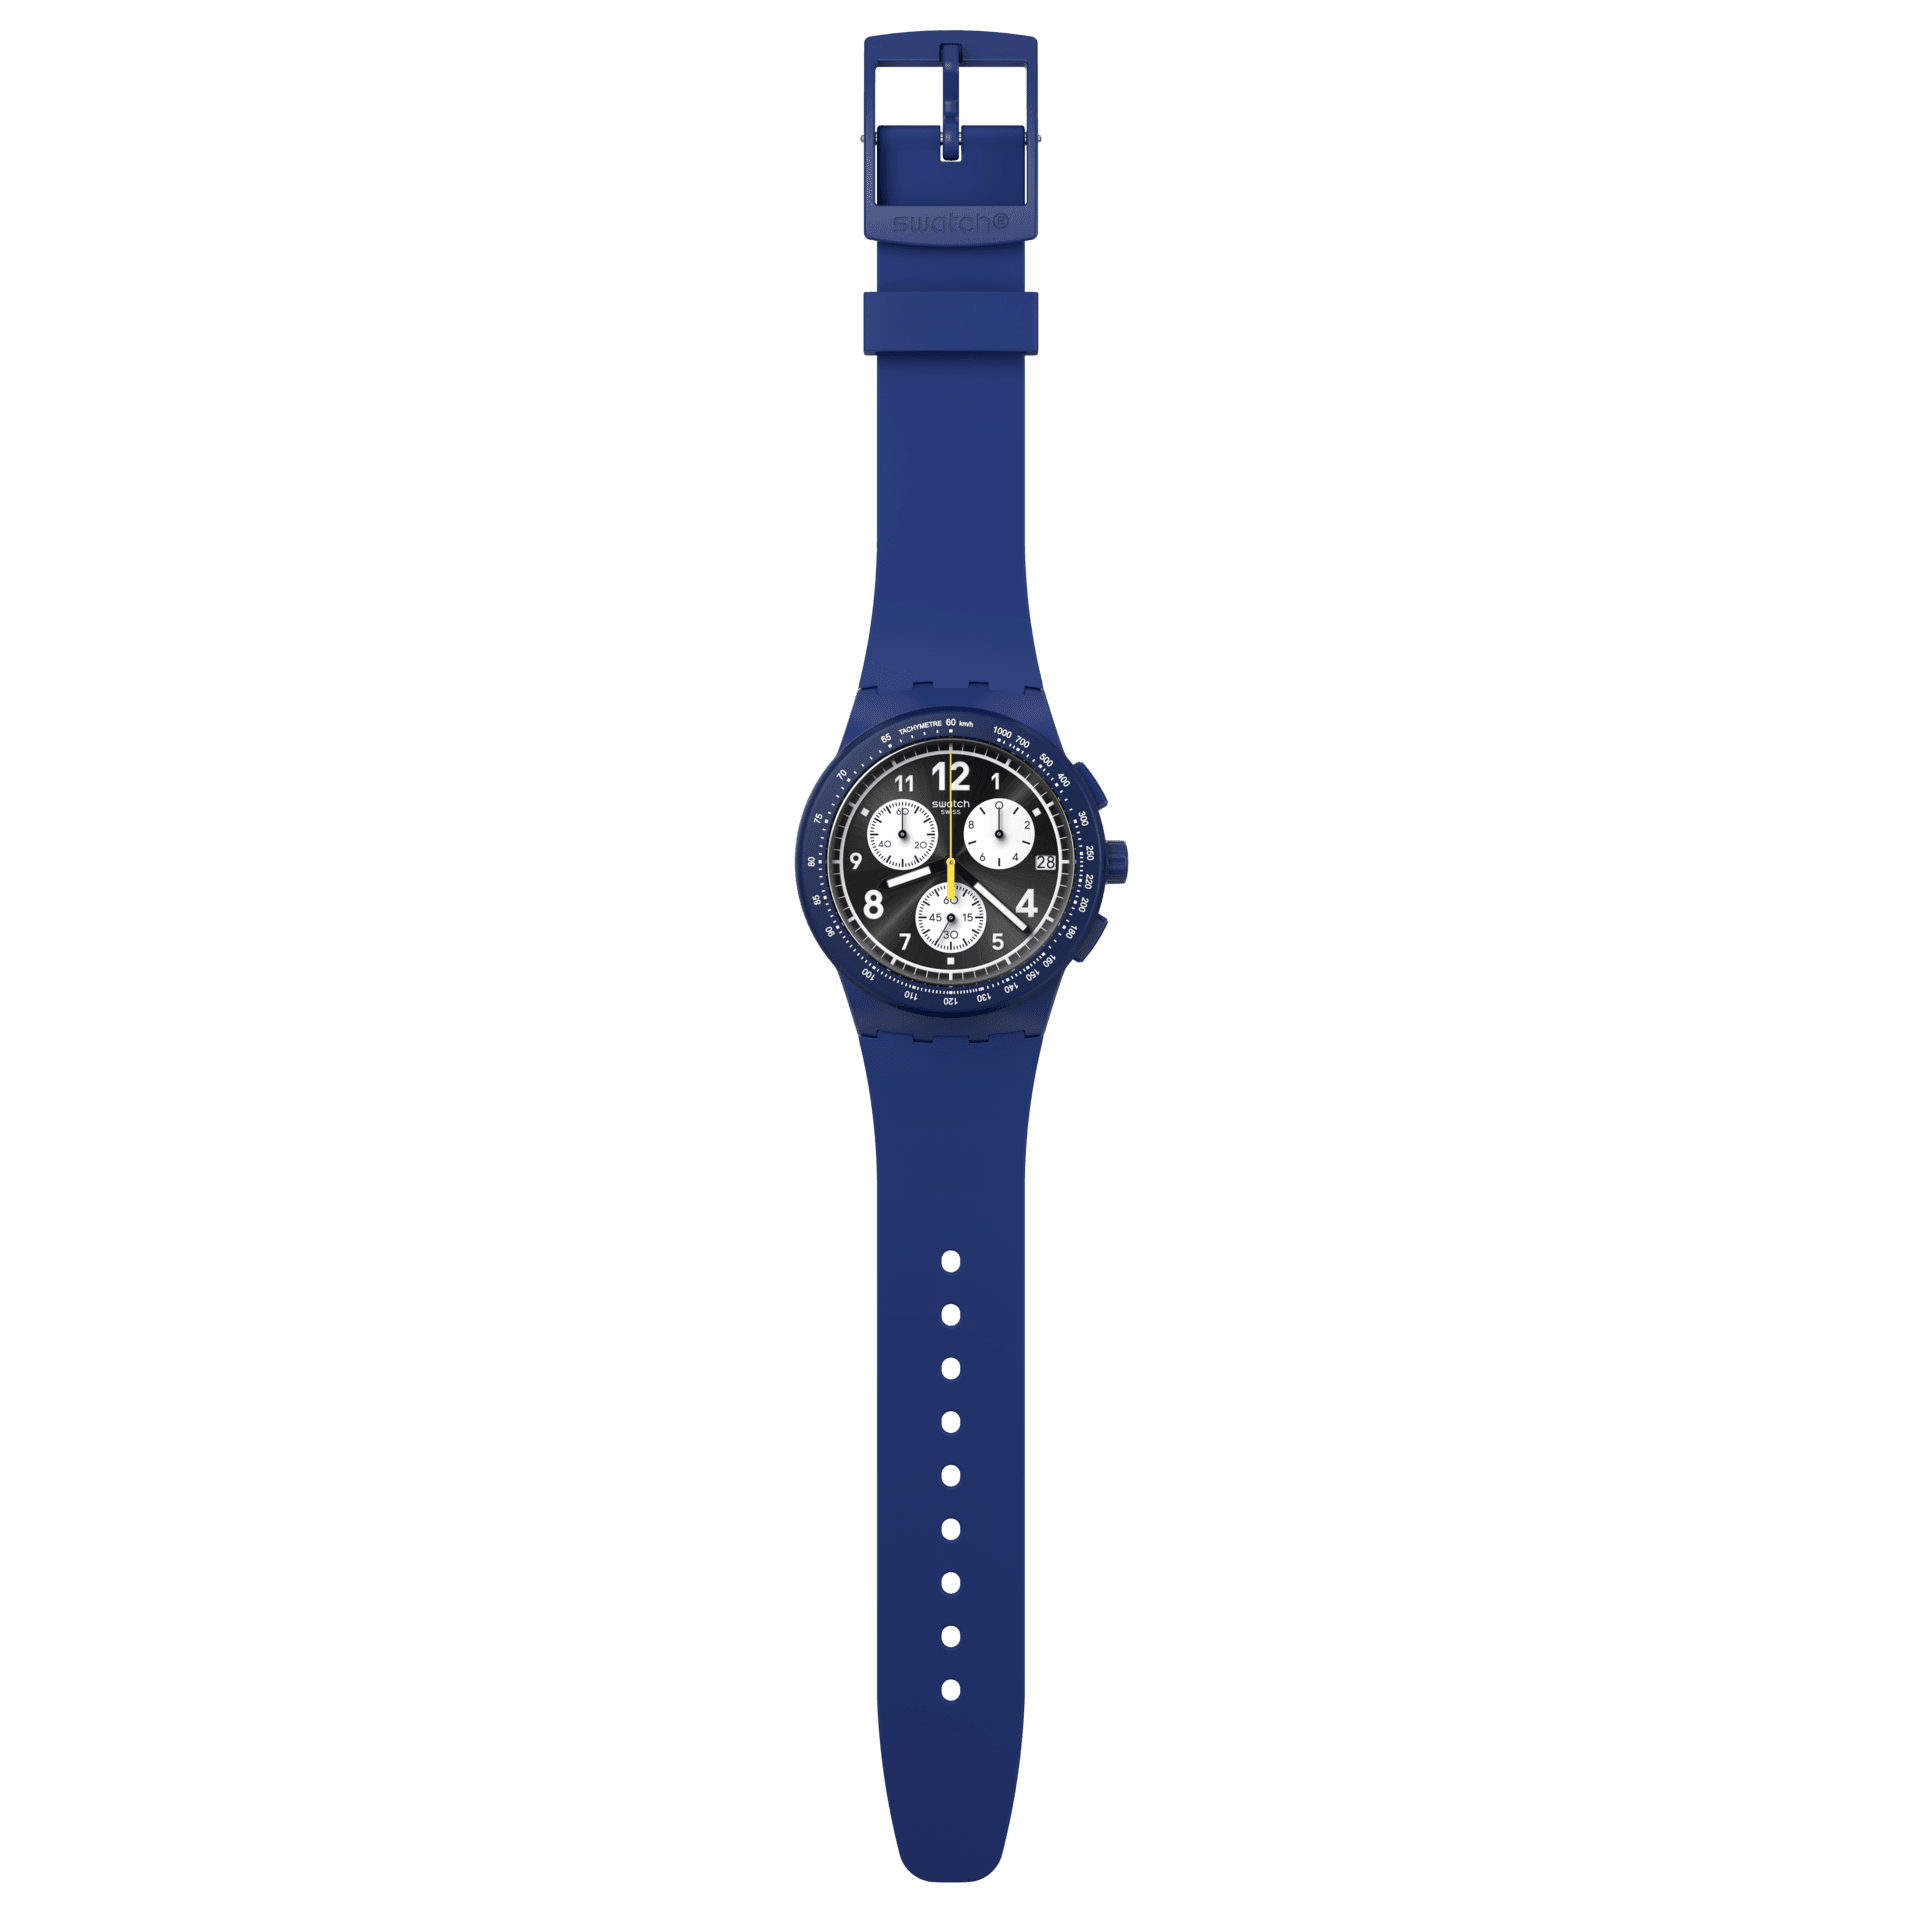 NOTHING BASIC ABOUT BLUE - SUSN418 | Swatch® United States